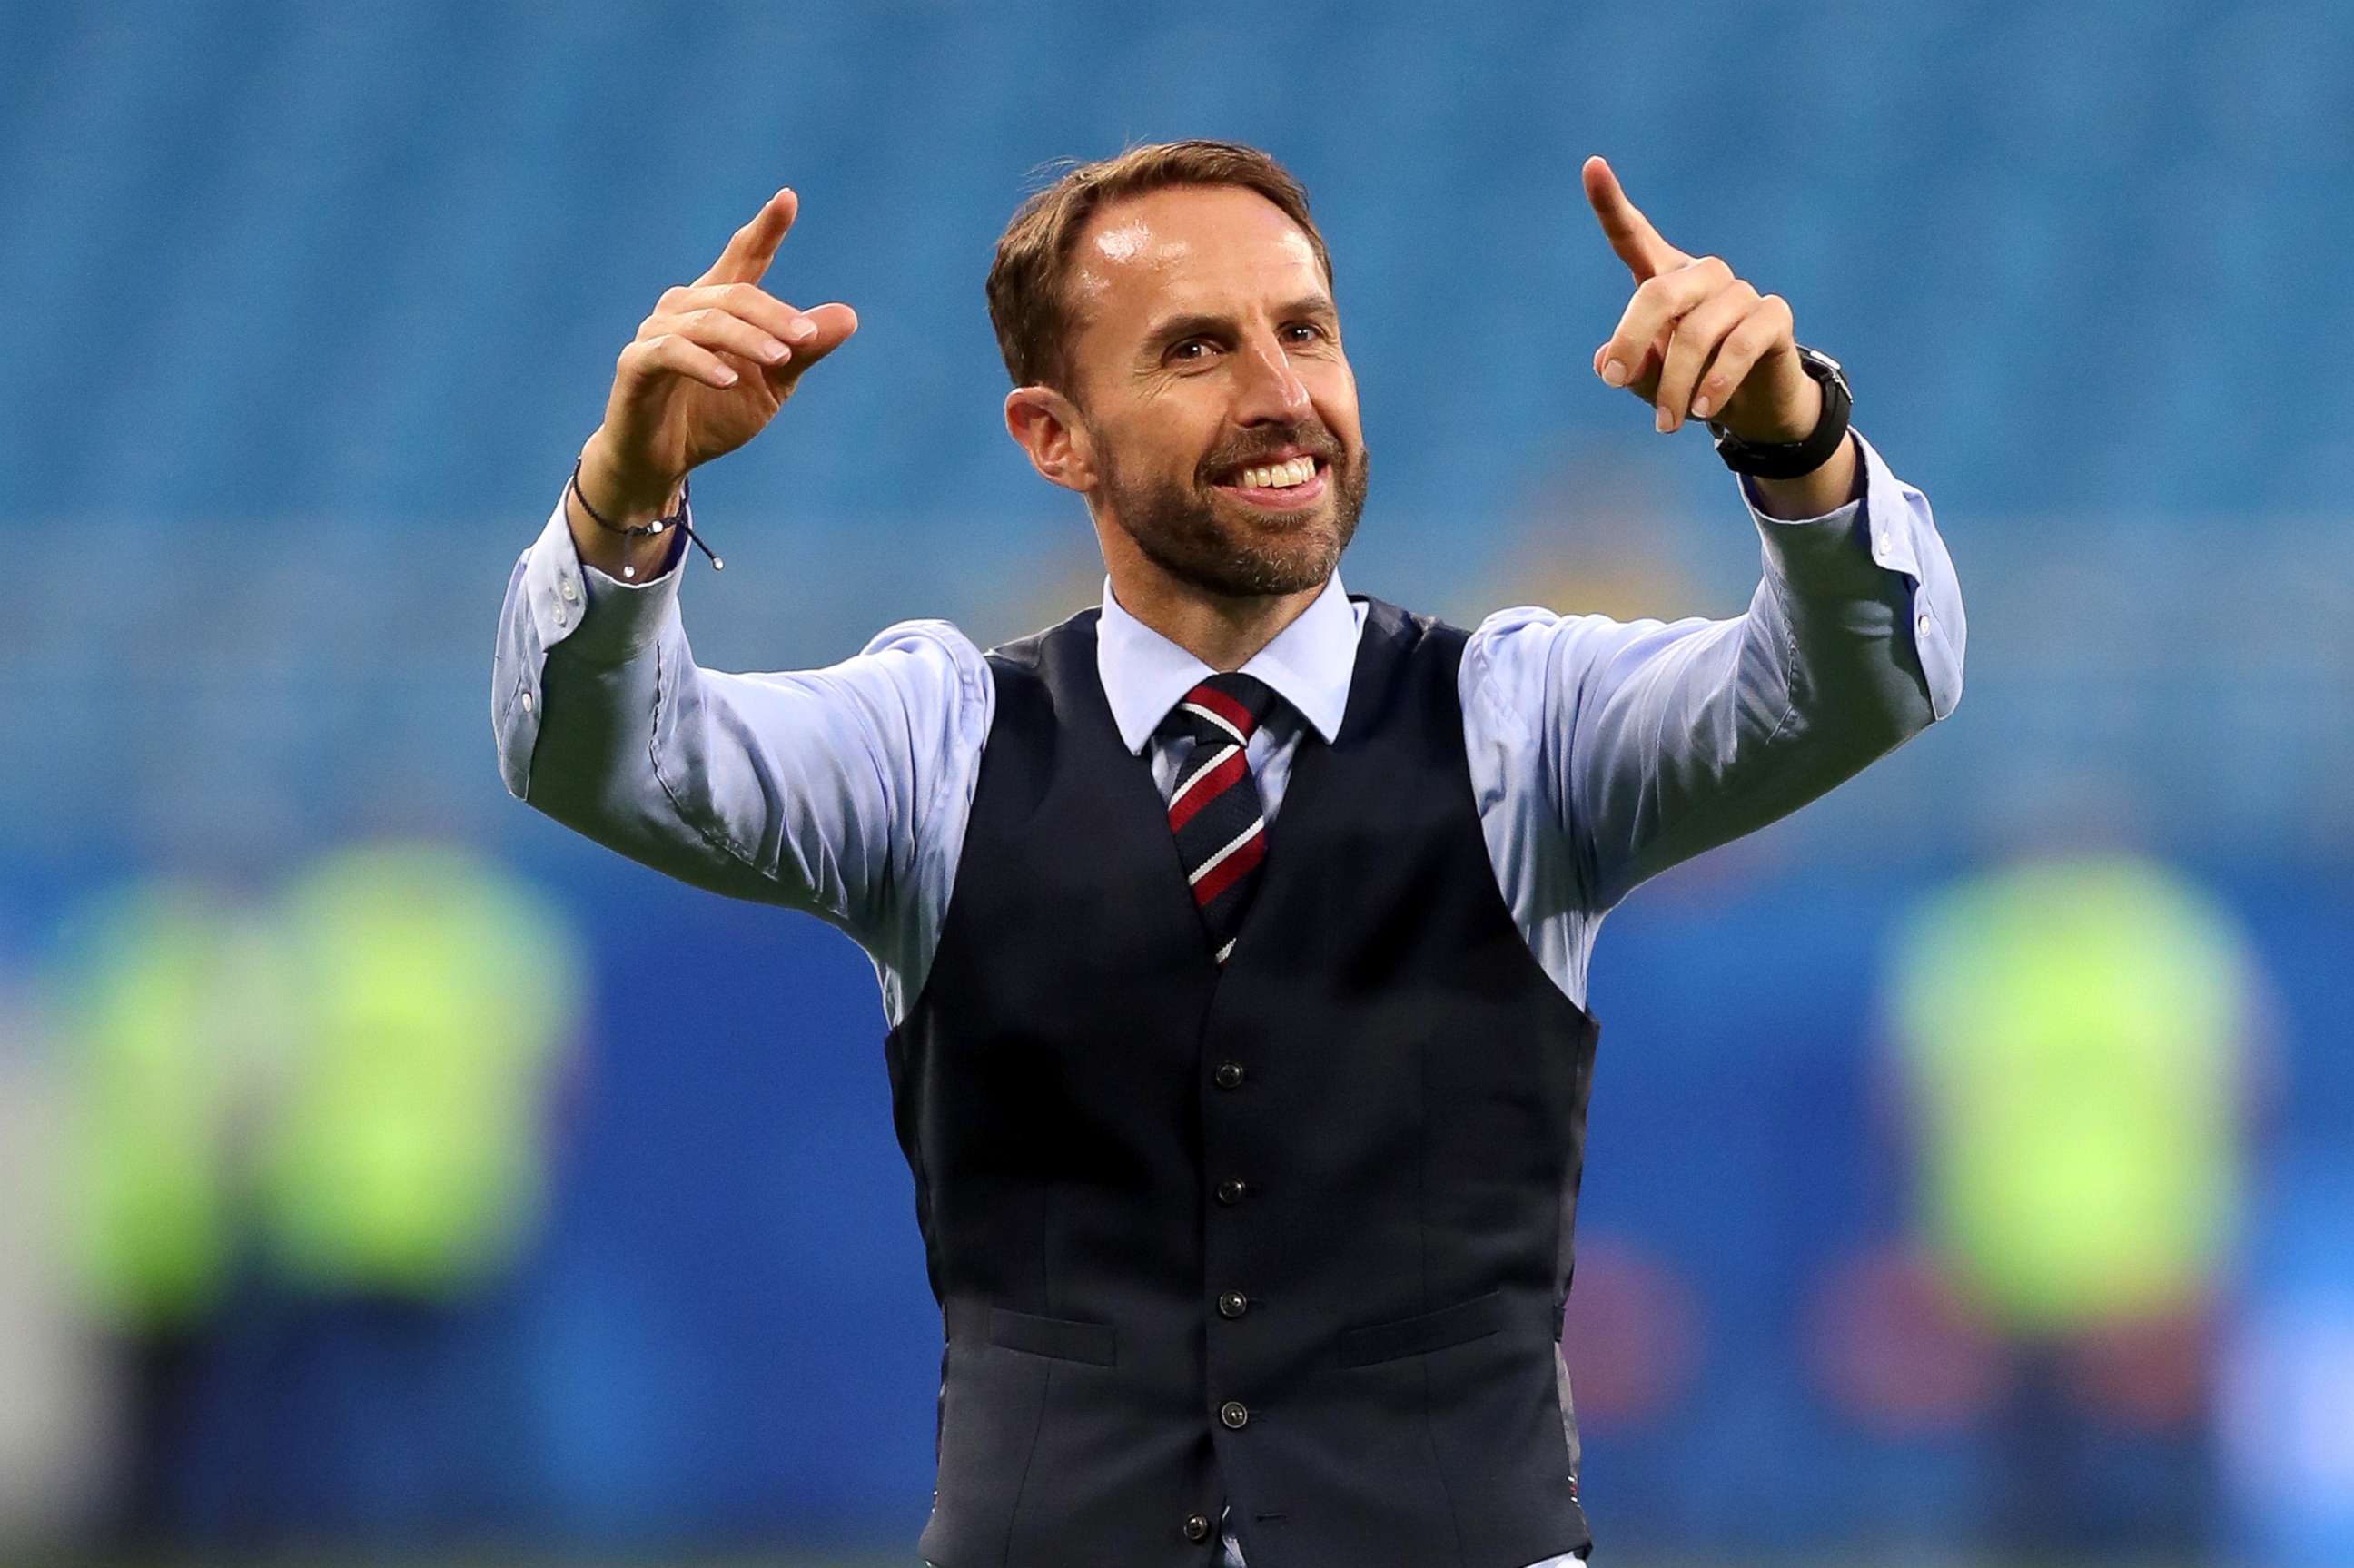 PHOTO: Gareth Southgate, Manager of England, celebrates at the final whistle following victory during the 2018 FIFA World Cup match between Sweden and England, July 7, 2018, in Samara, Russia.